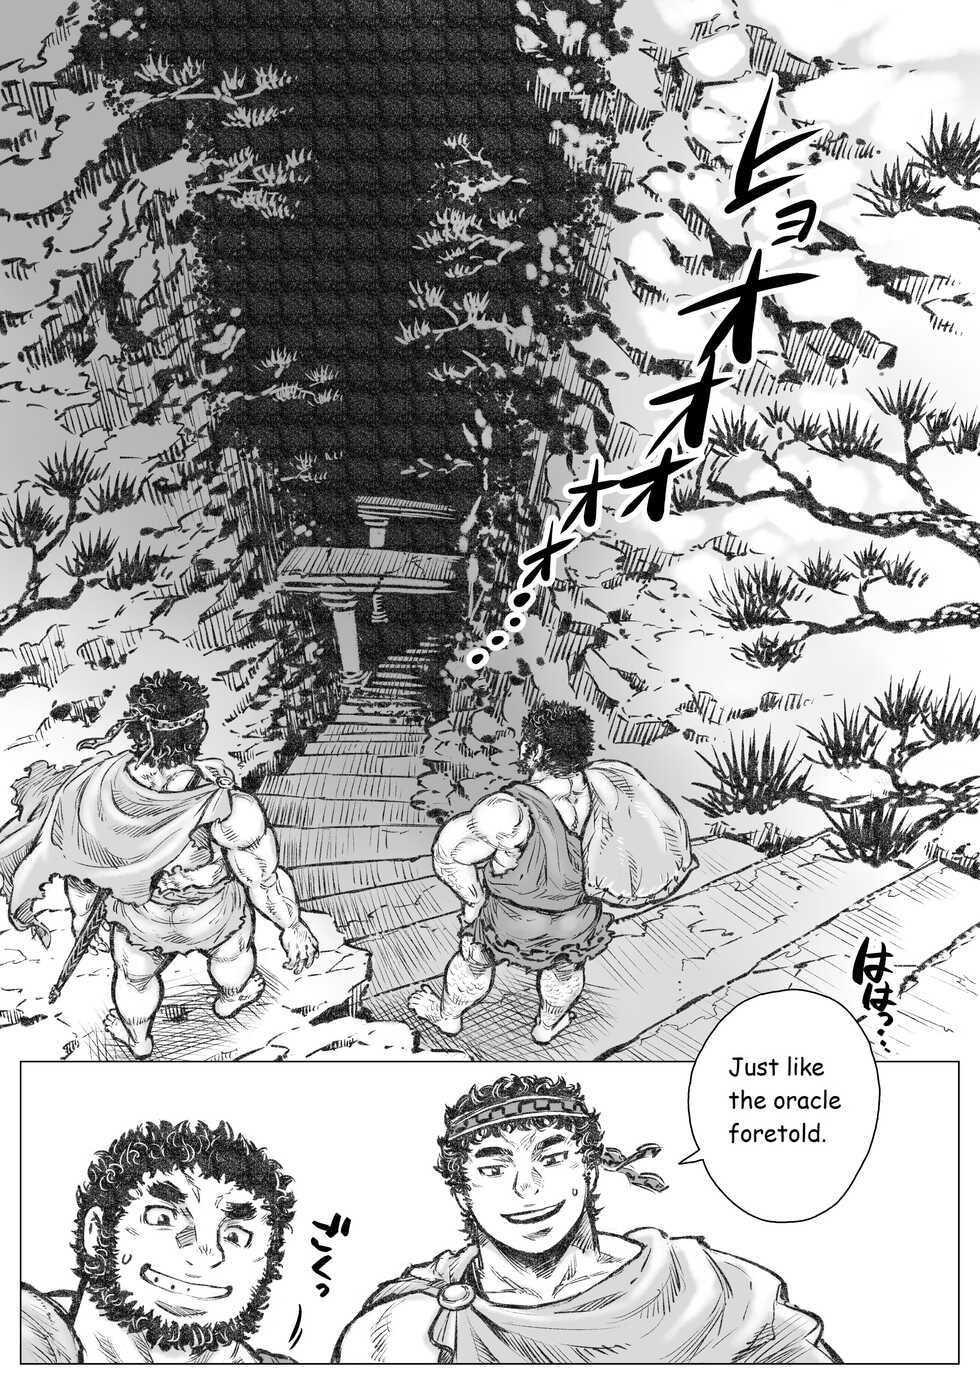 [Hastured Cake] Labyrinth no Oushi I | The Bull of the Labyrinth I  [English] - Page 2